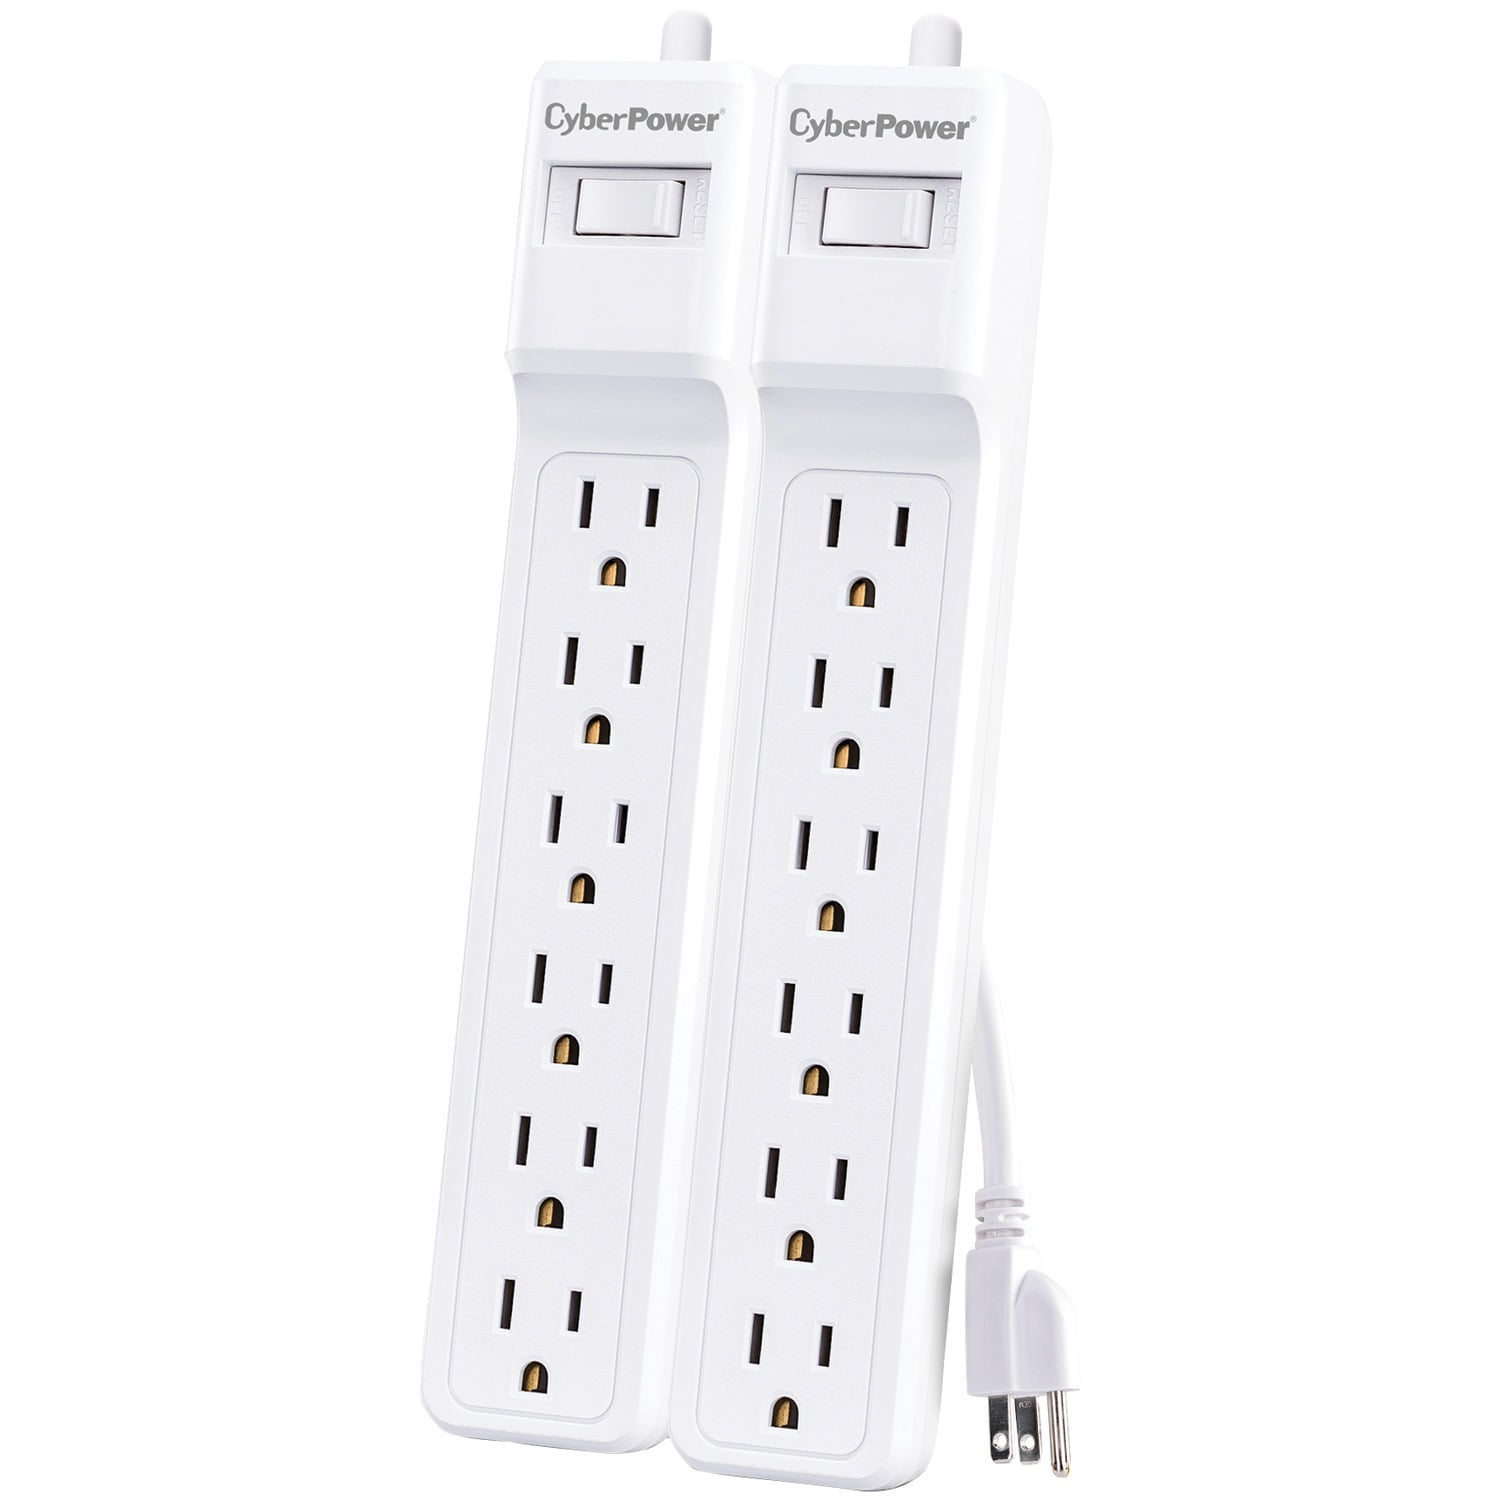 6 Outlets 1500J/125V 15 ft Power Cord White CyberPower B615 Essential Surge Protector